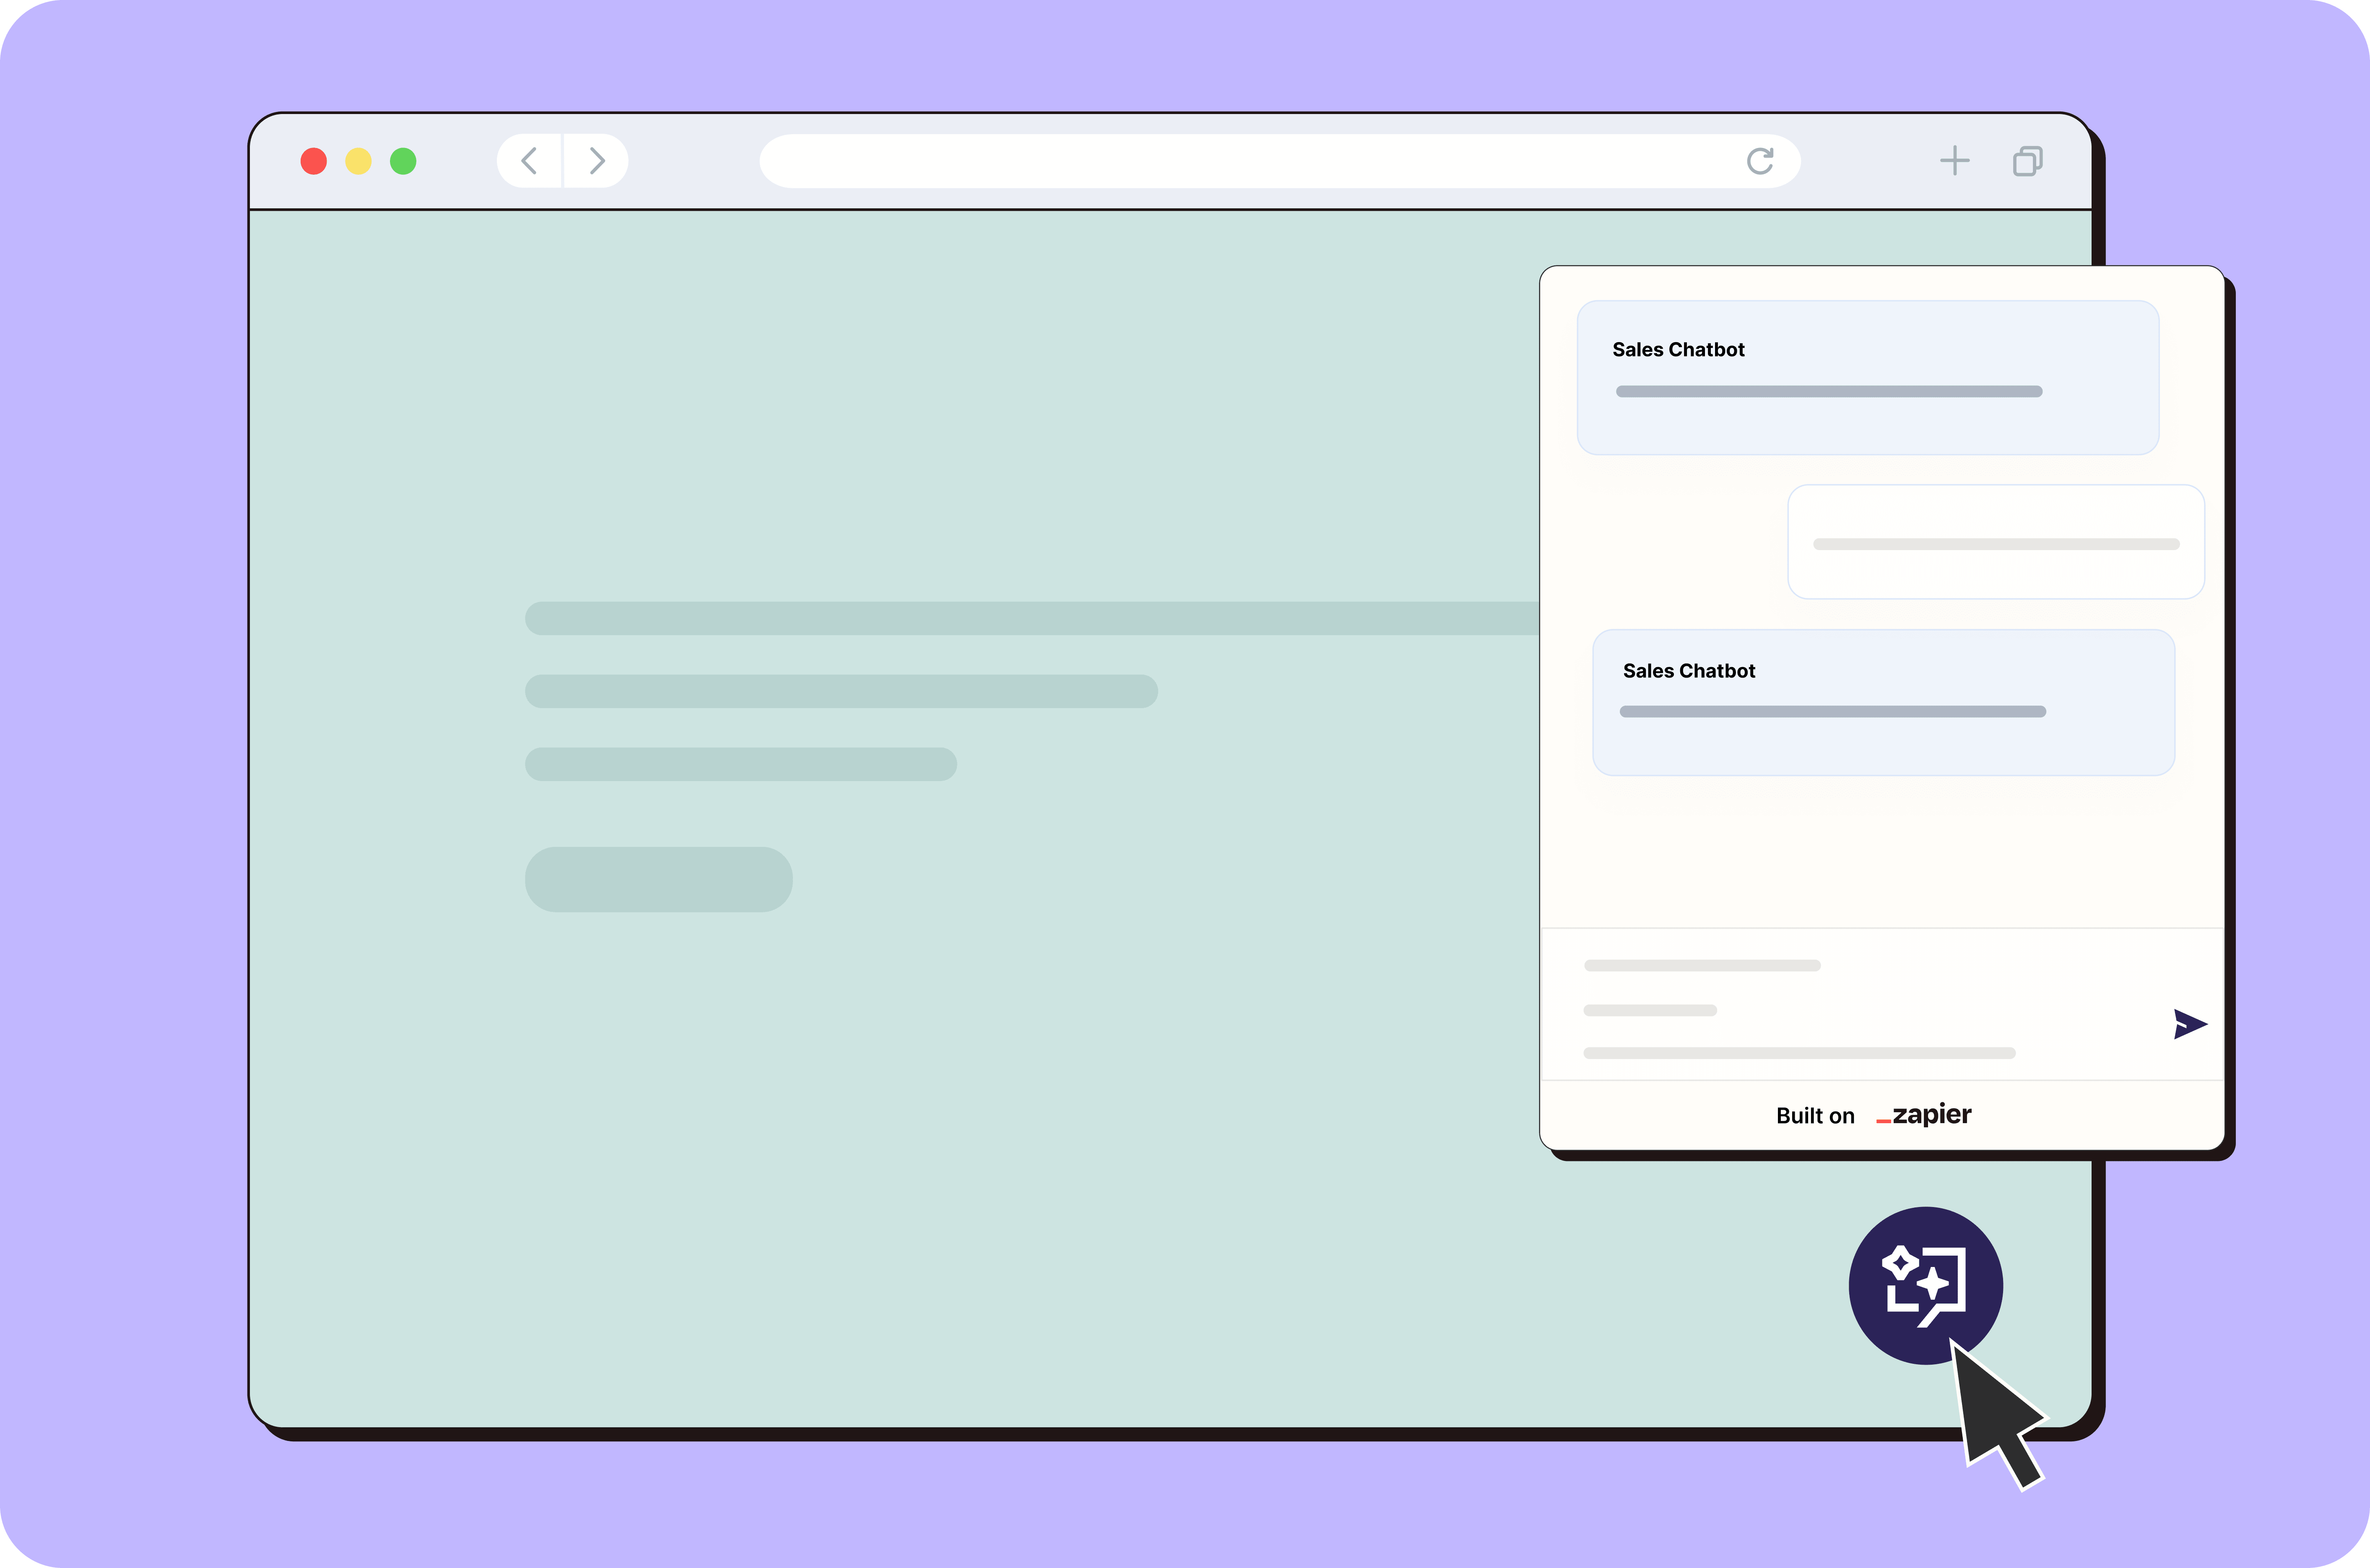 Customize, share, and embed your chatbot!